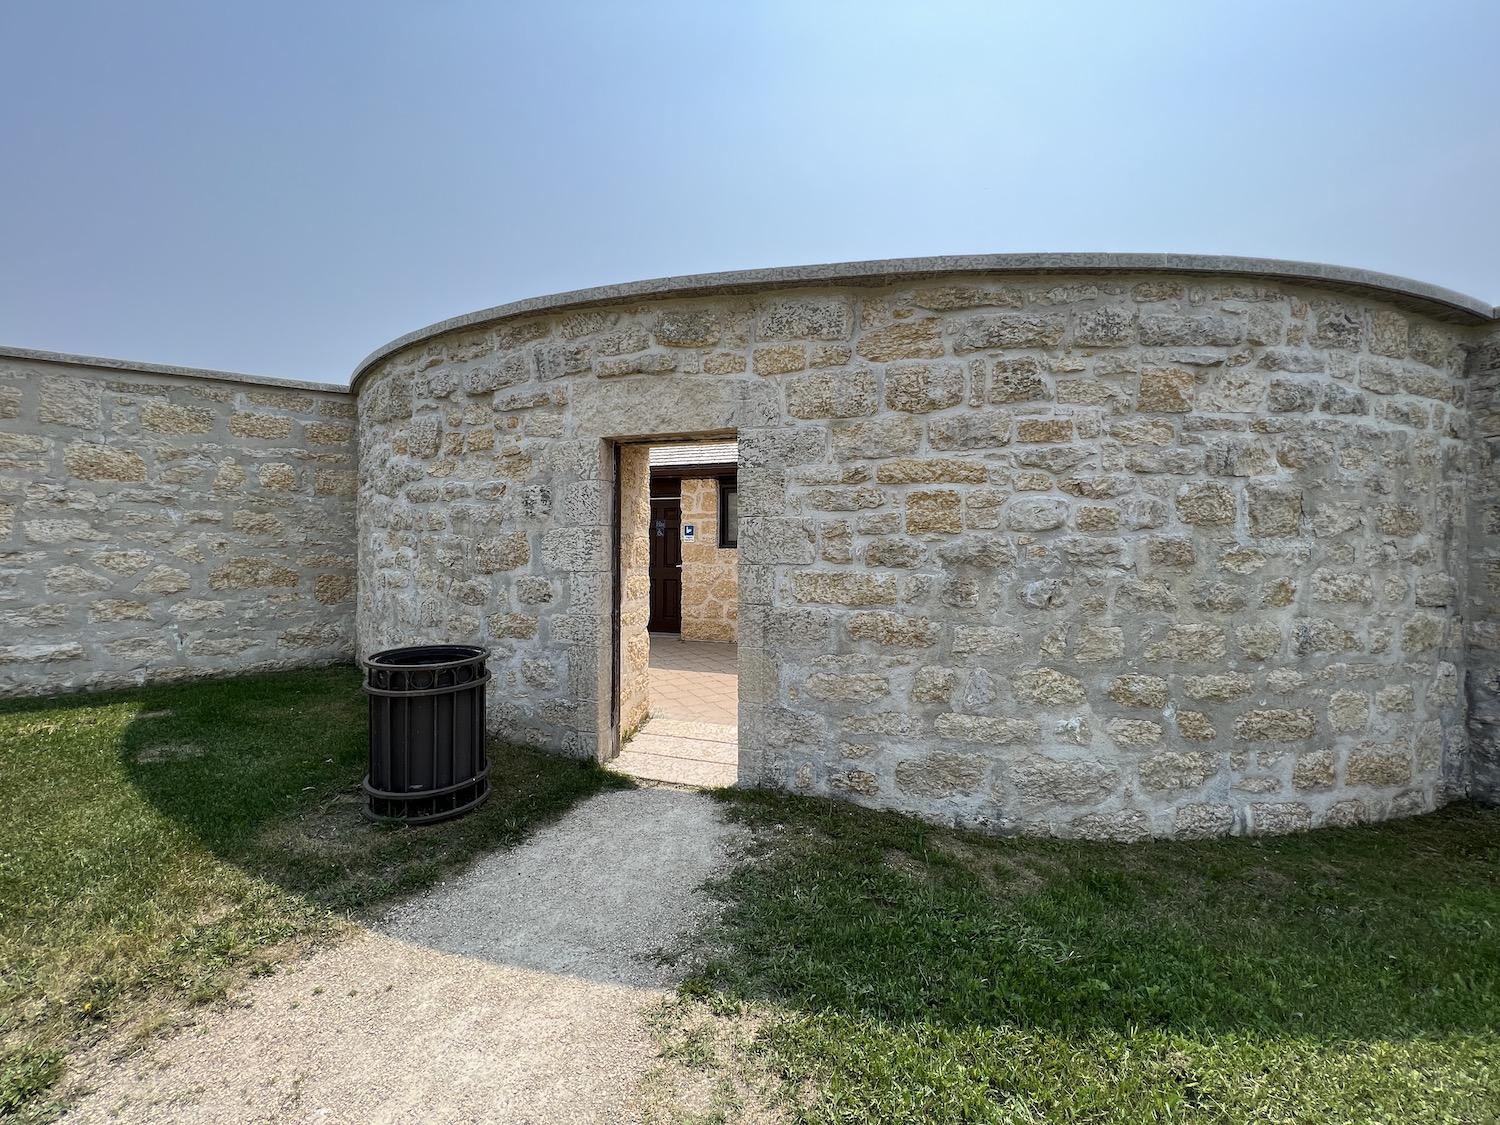 There's a washroom hidden in the southeast bastion at Lower Fort Garry.